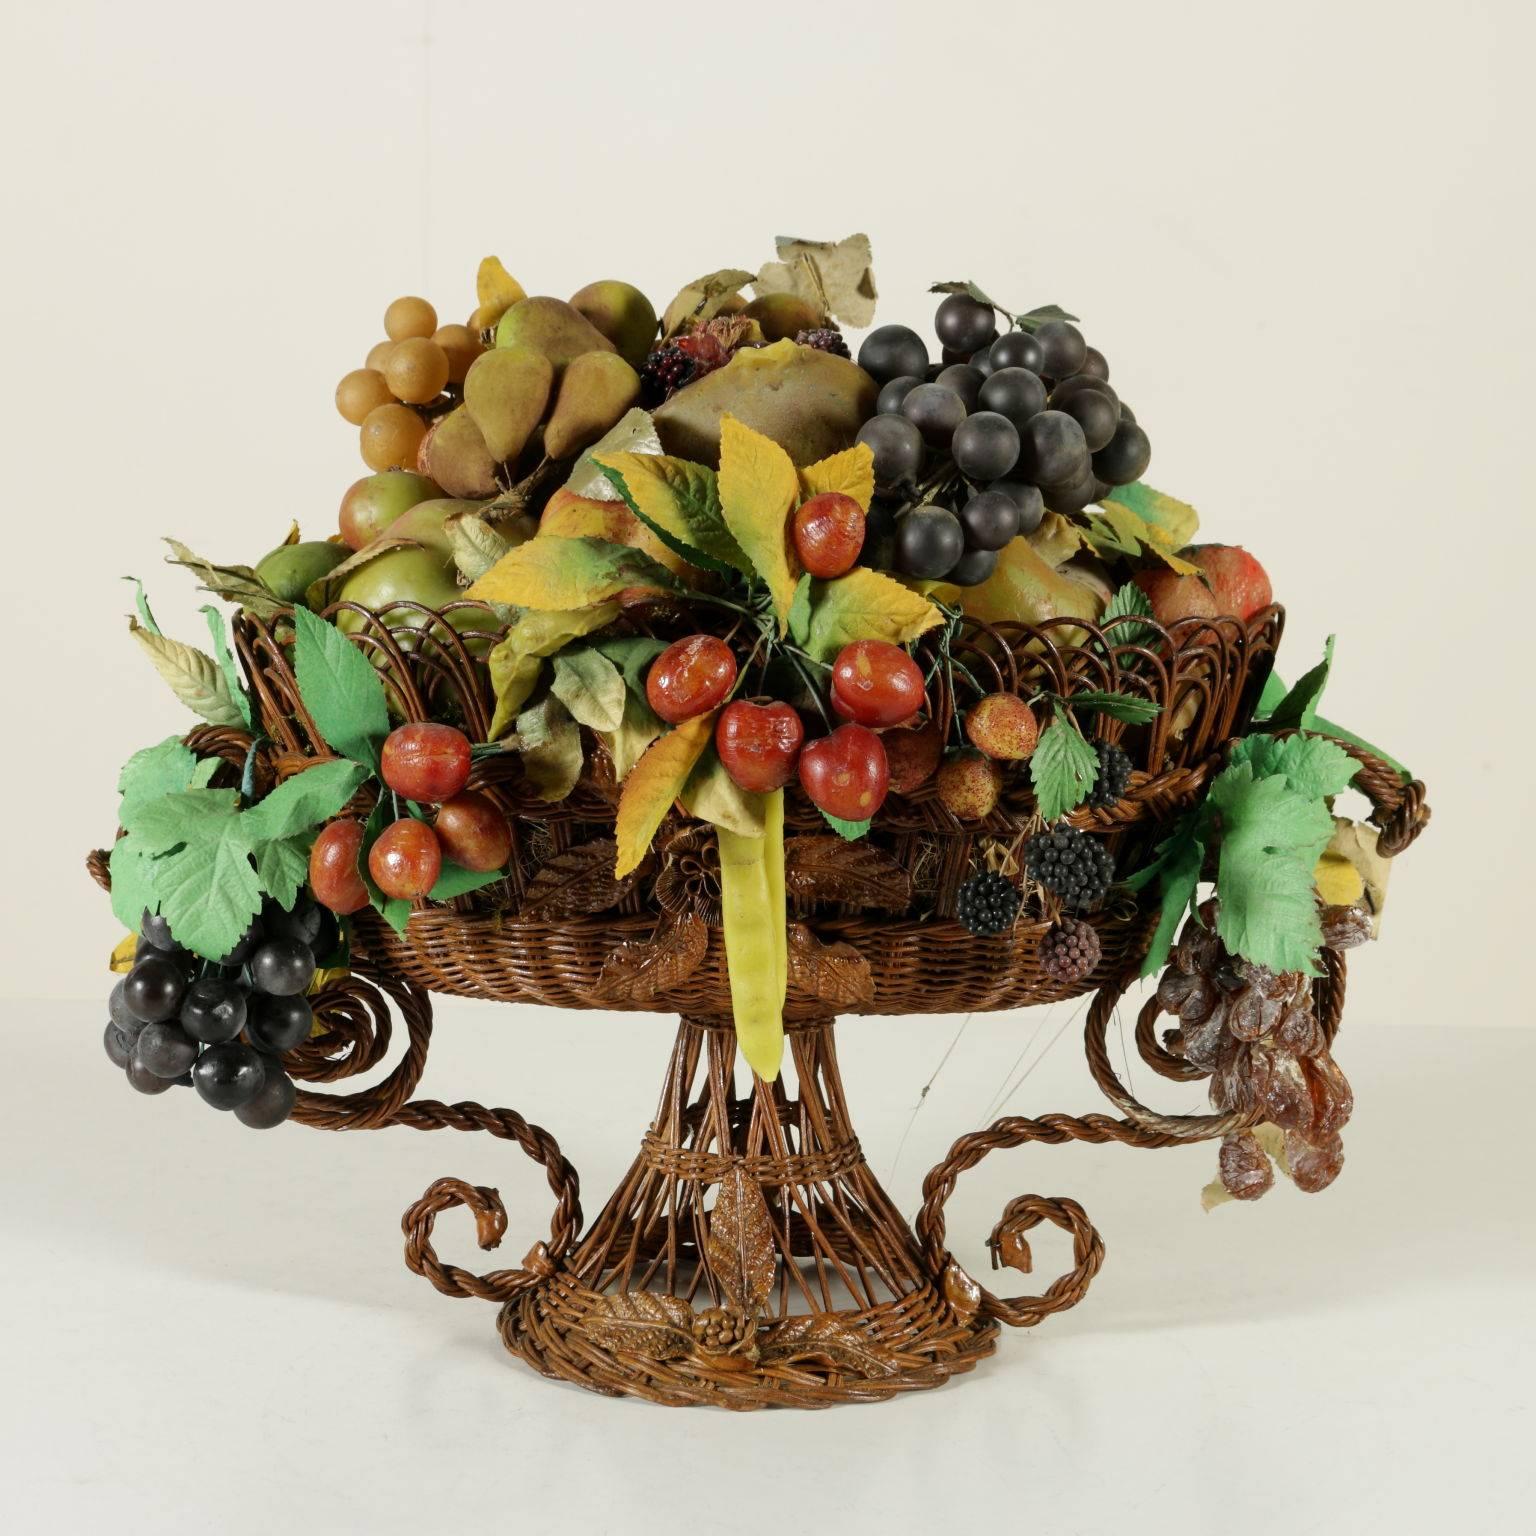 An elegant wicker basket features a colorful wax fruit composition with branches and leaves made of iron wire, paper and colored cloth. There are pomegranates, grape bunches, berries, plums, aubergines, mushrooms, etc. The realistic realization